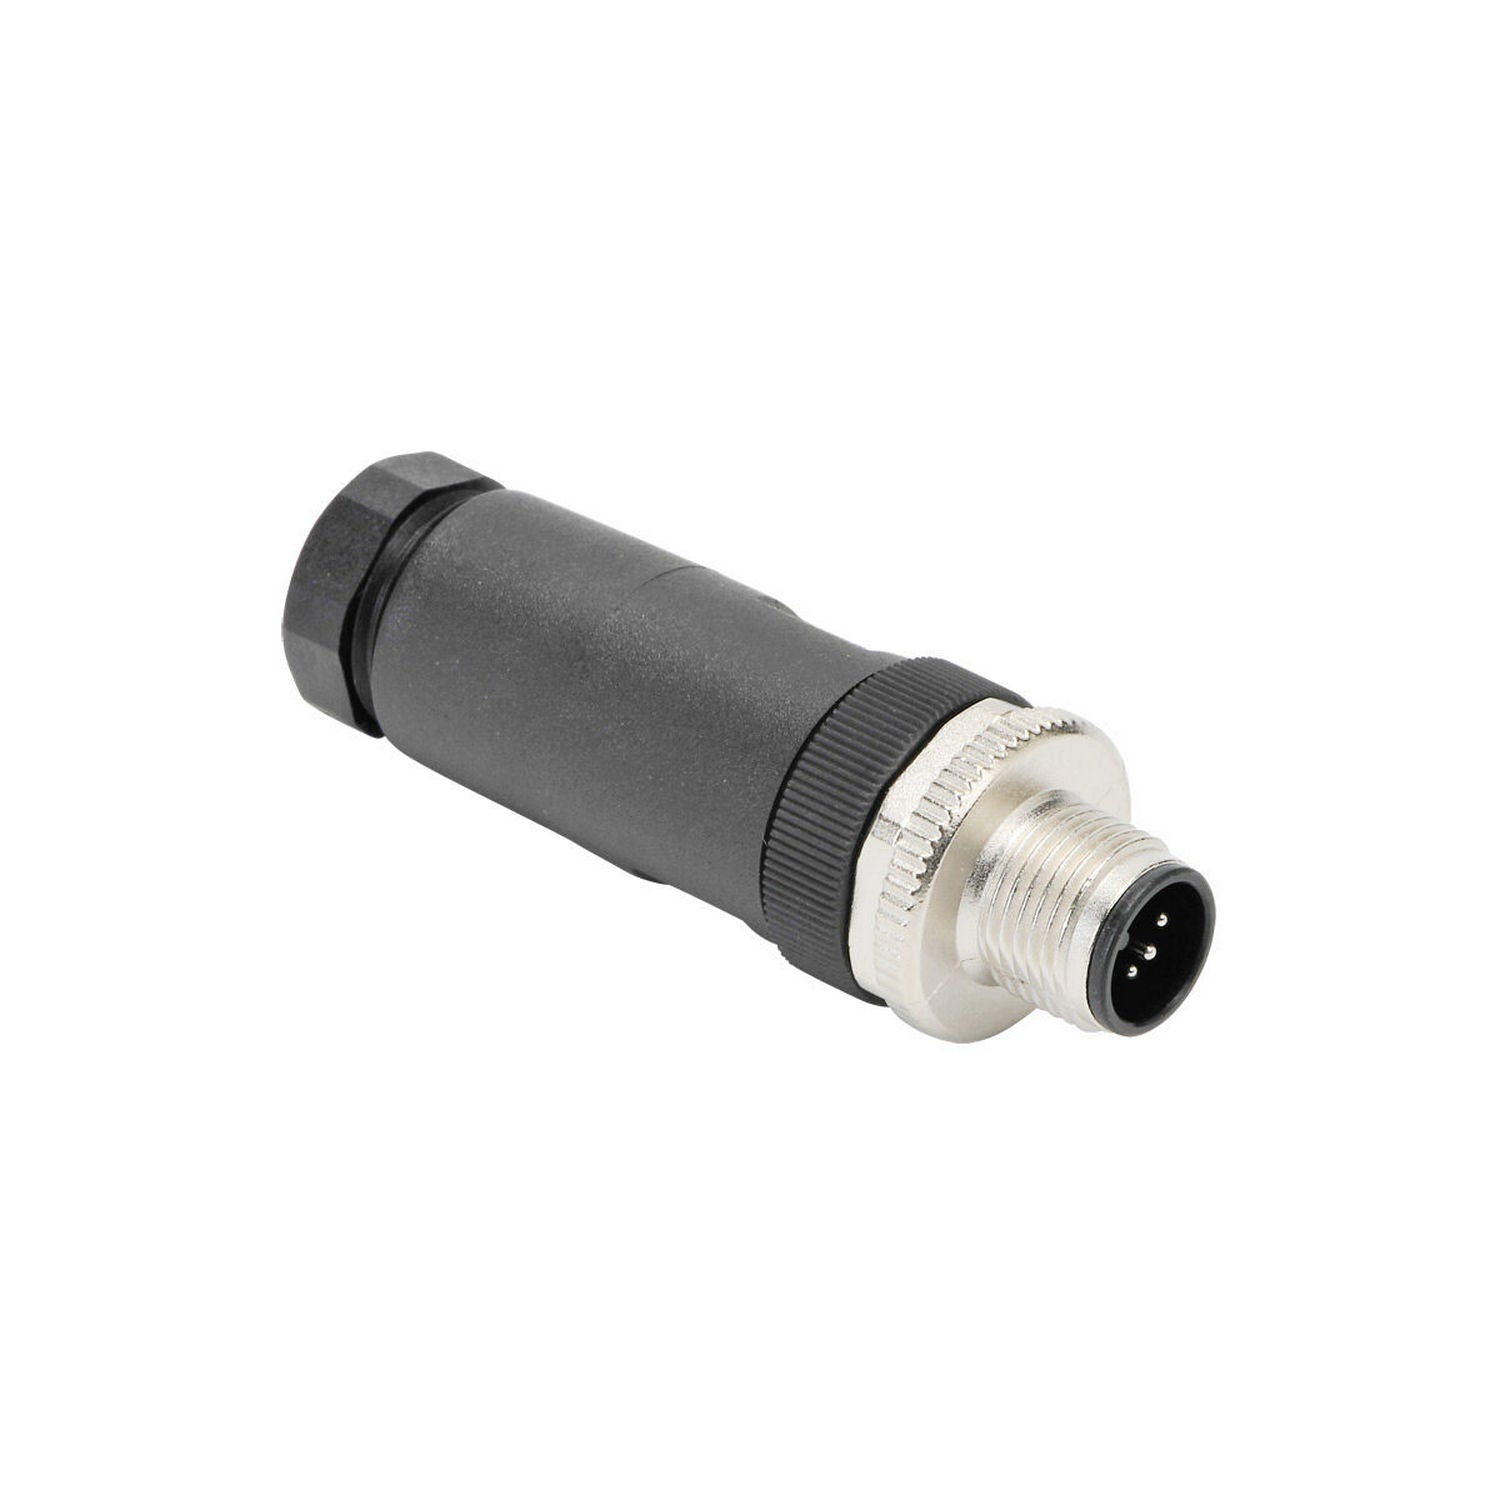 RGBW Male 5-pin Waterproof M12 Connector